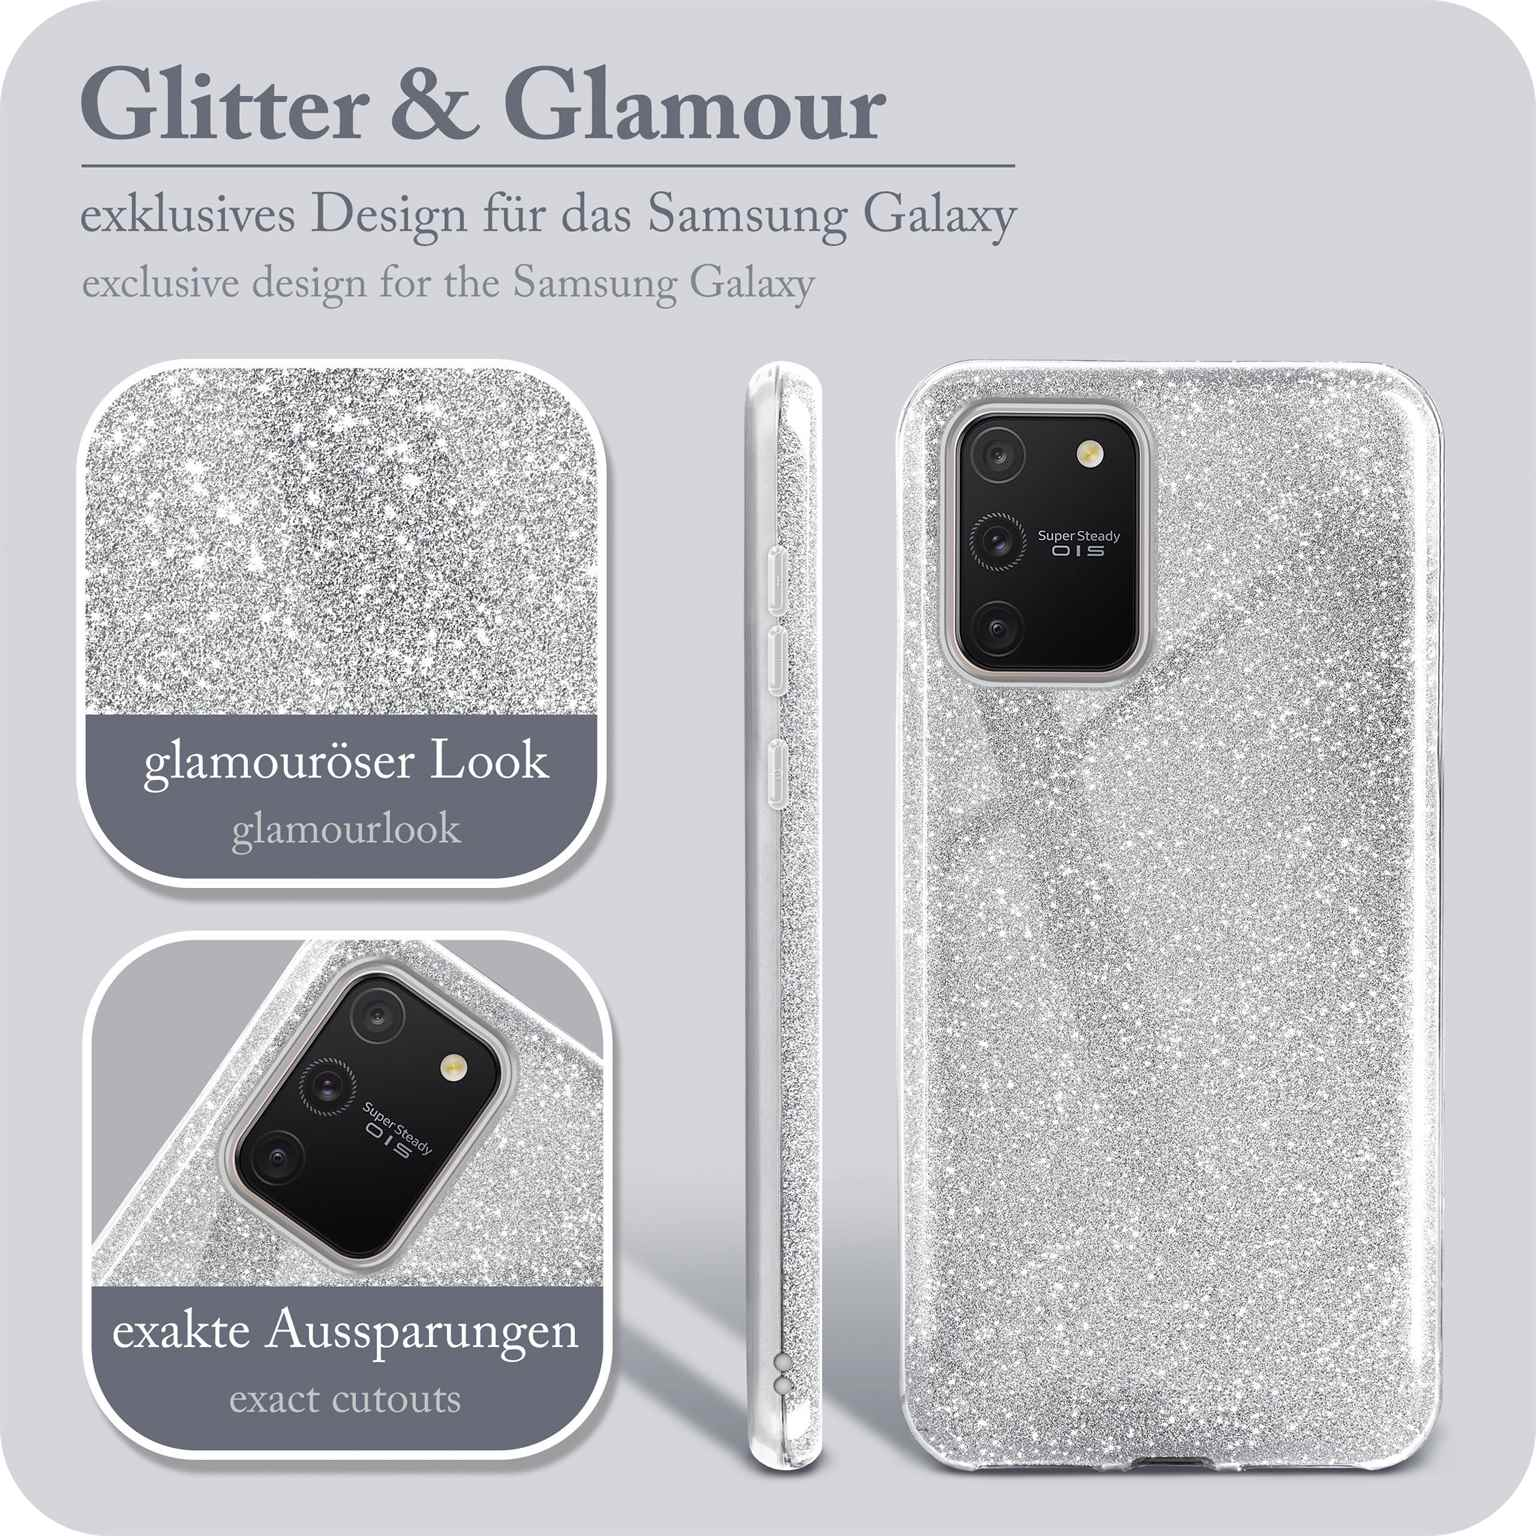 ONEFLOW Glitter Case, Backcover, Lite, Sparkle Samsung, S10 - Silver Galaxy